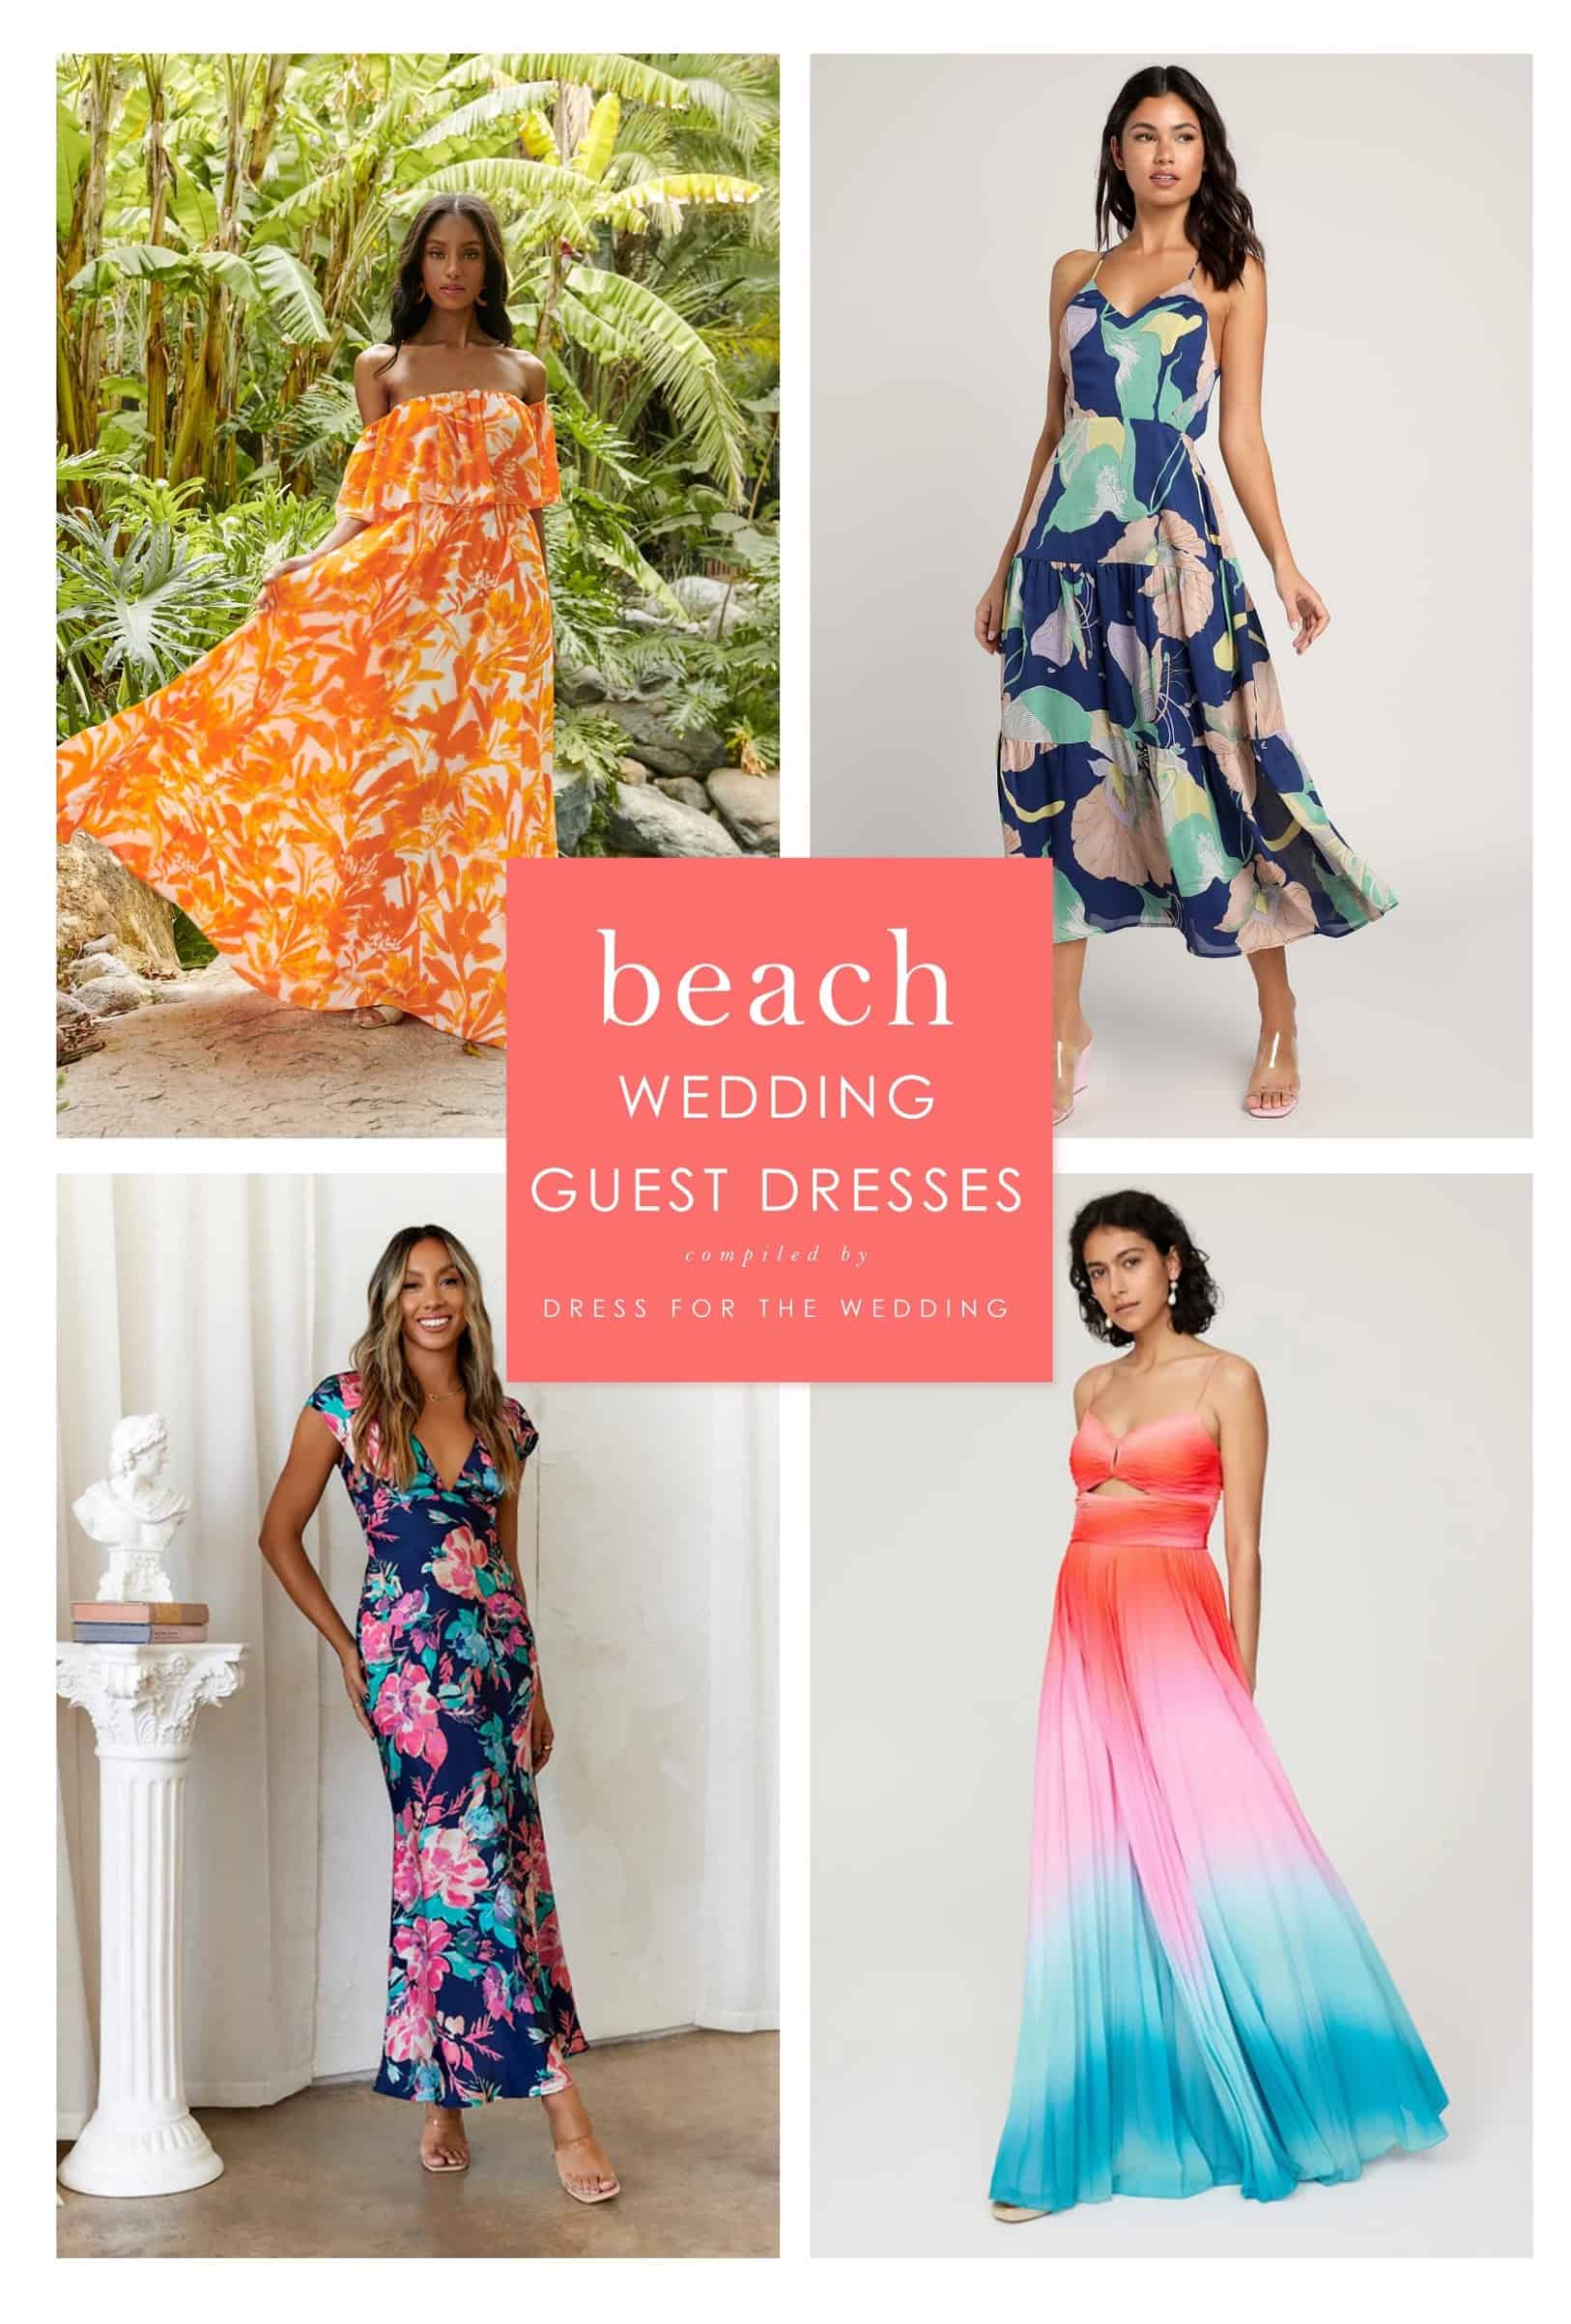 13 Breathtaking Pool Party Outfit Ideas for The Coolest Pool Party